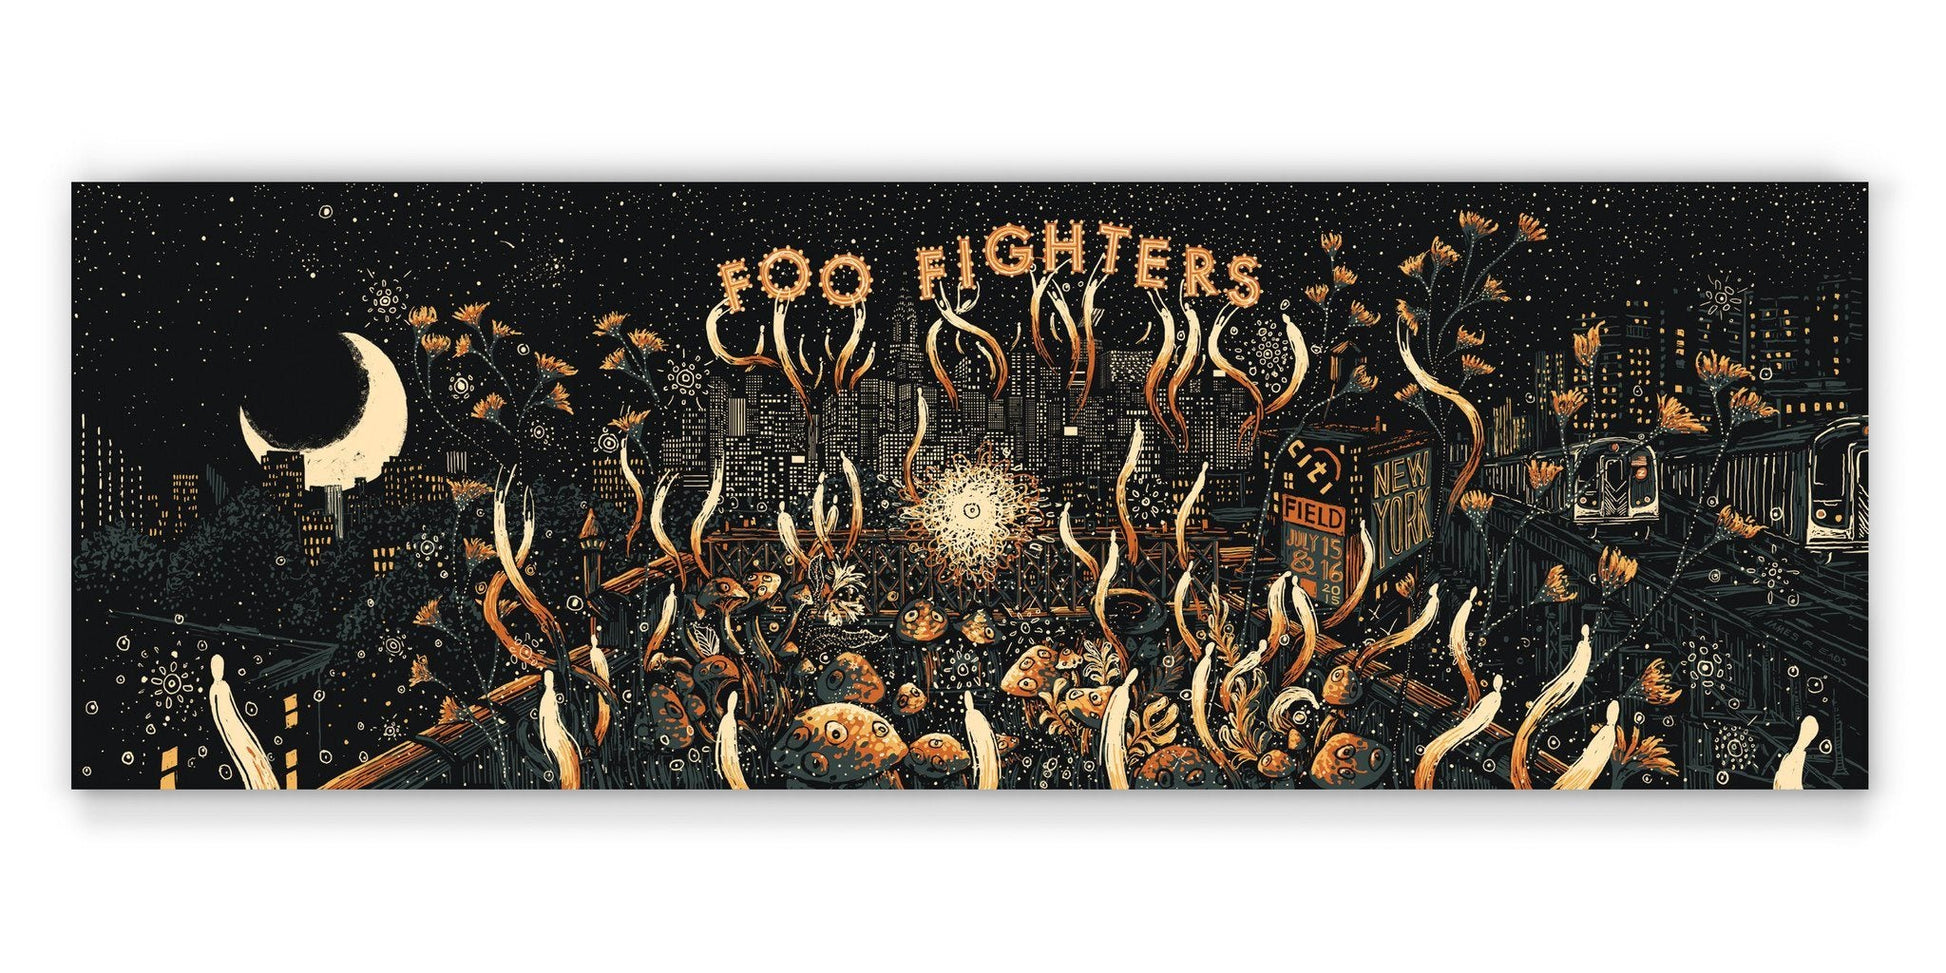 Foo Fighters NYC Moon Variant (AP Edition of 40) Print James R. Eads